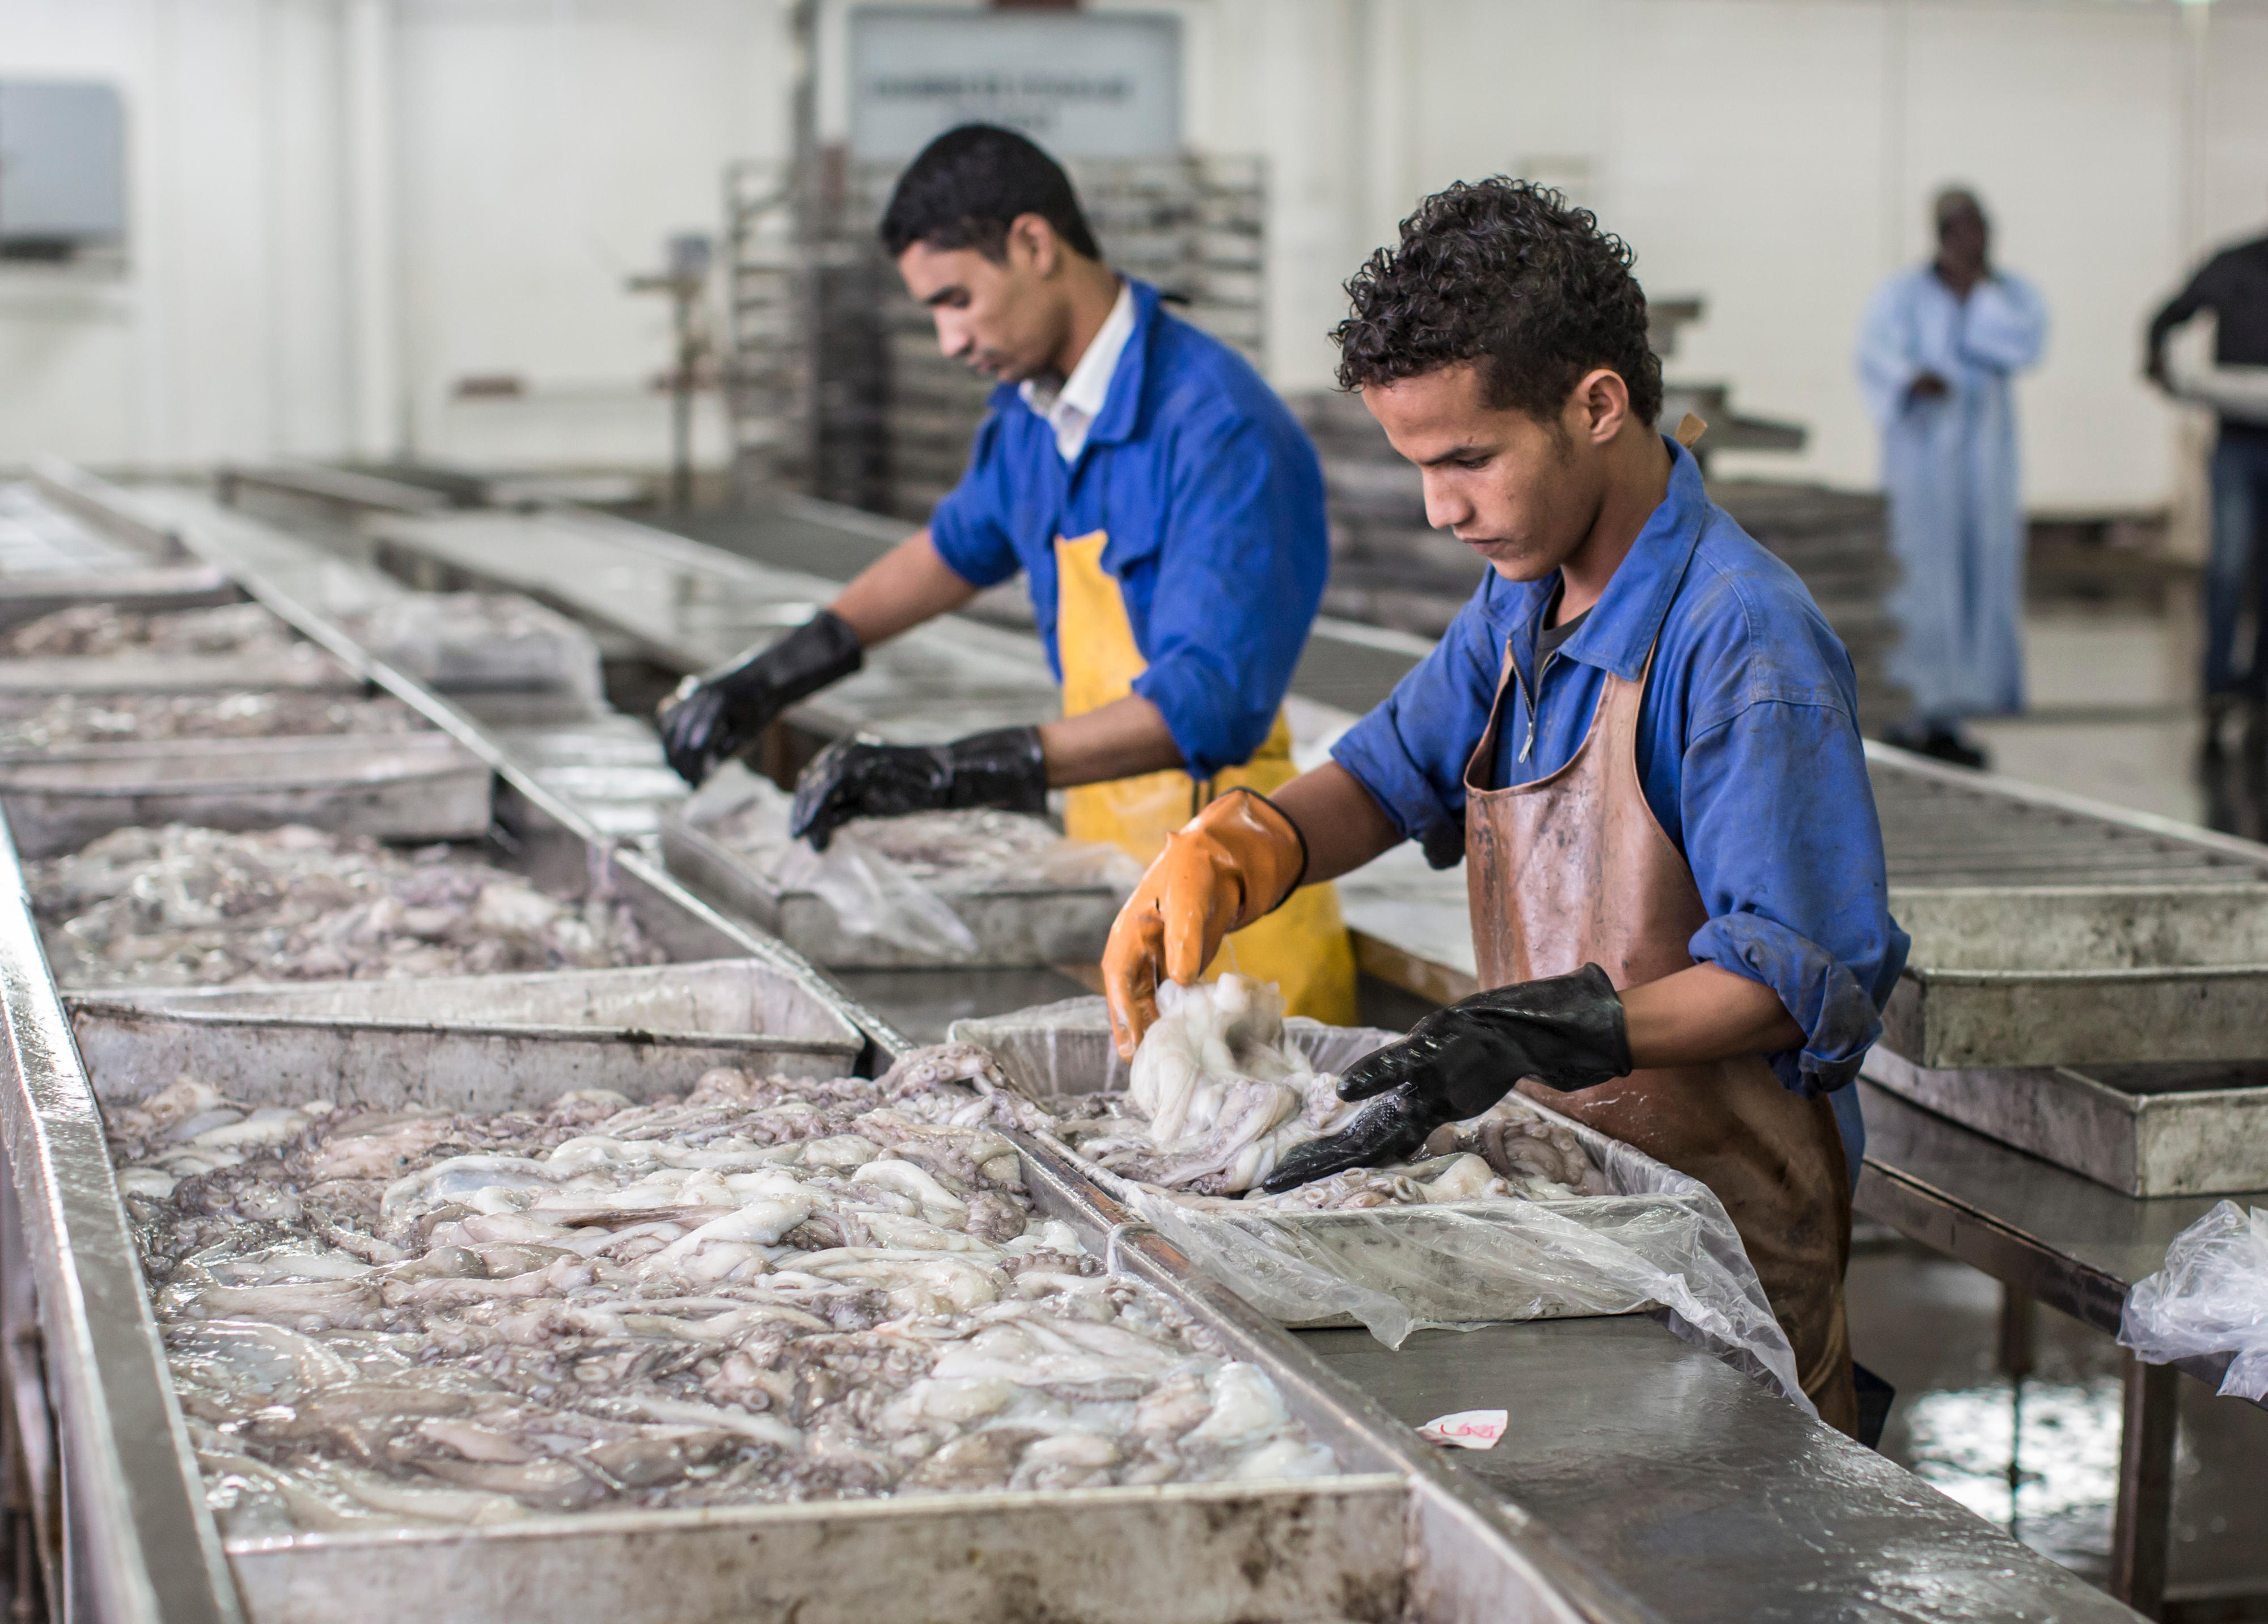 Workers at a fish factory in the port of Nouadhibou, Mauritania